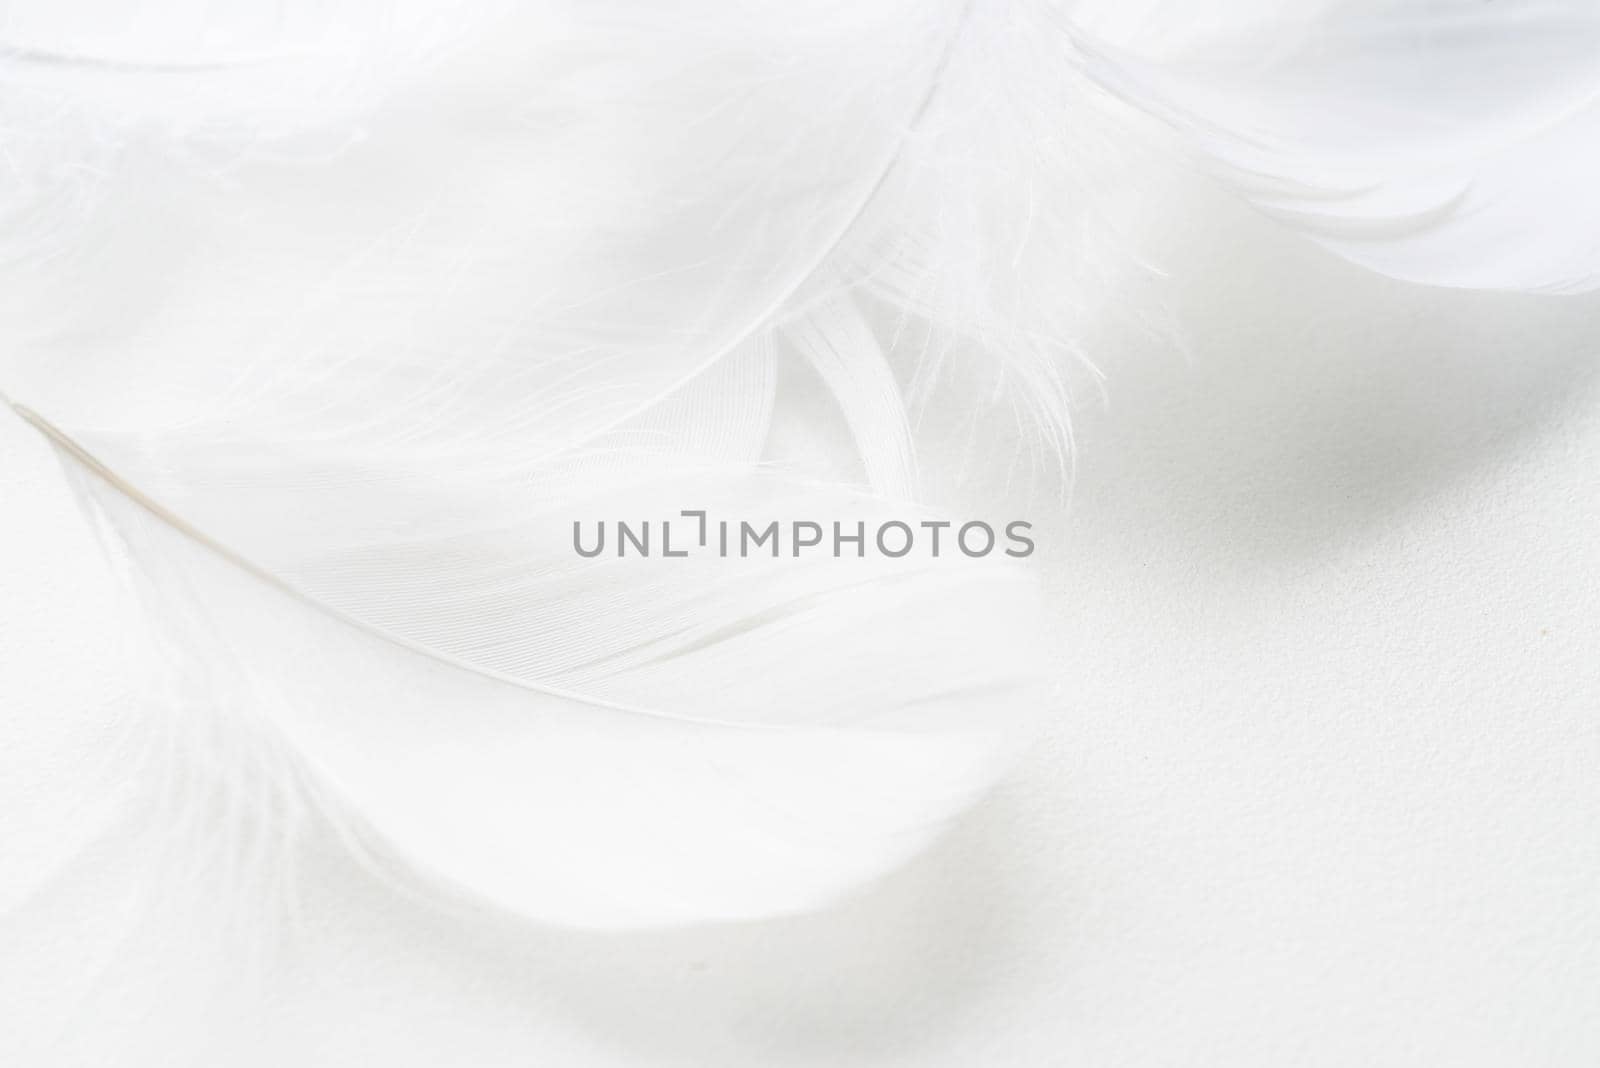 Abstract background. Texture. Black and white fluffy bird feathers background